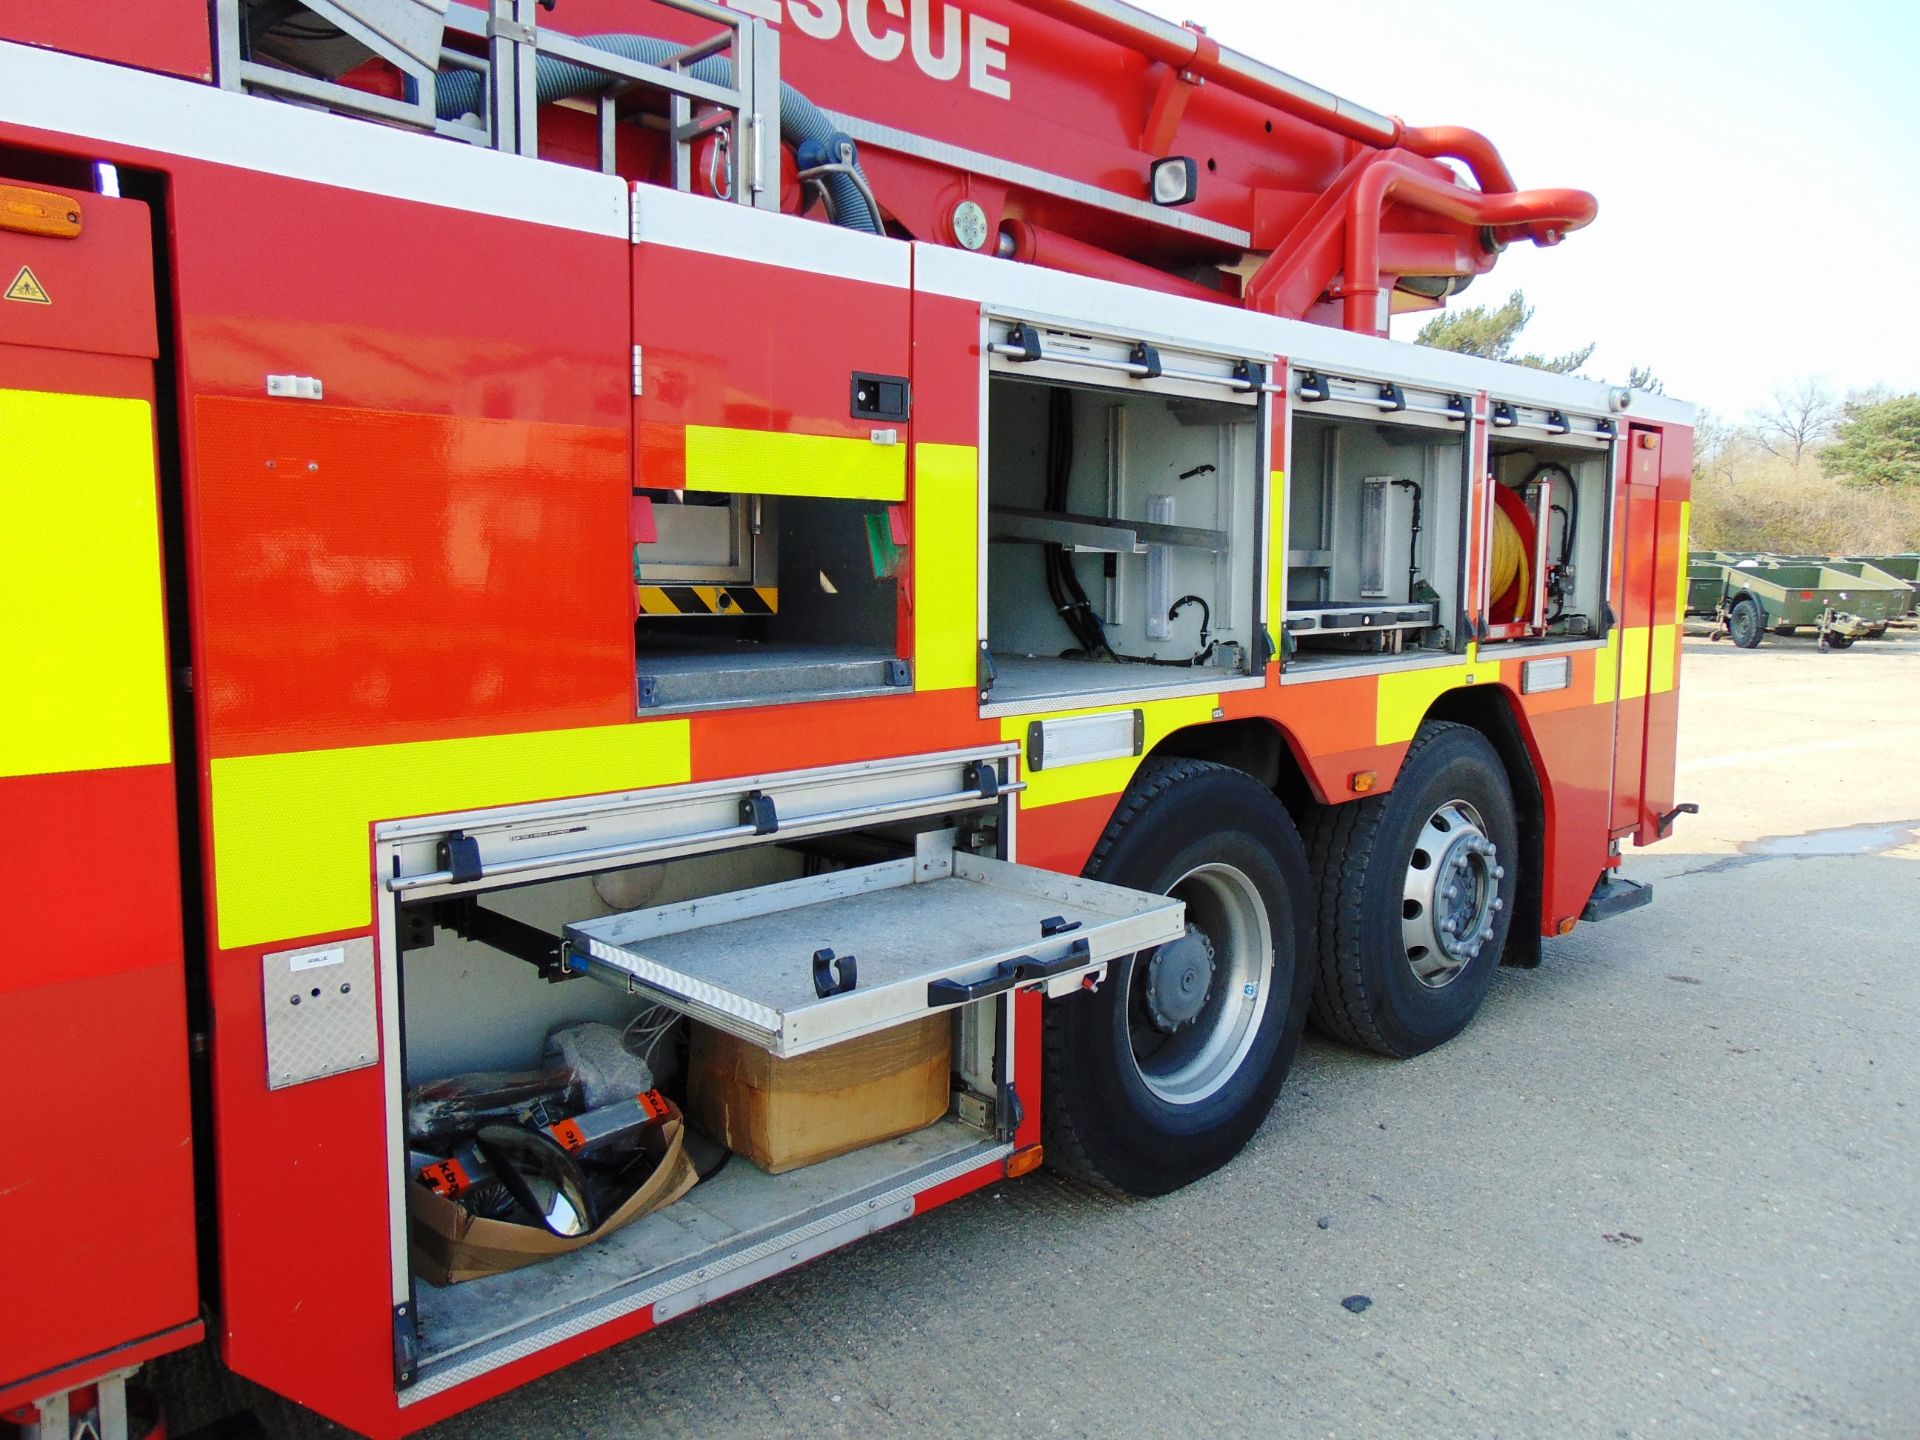 2008 Mercedes Econic CARP (Combined Aerial Rescue Pump) 6x2 Aerial Work Platform / Fire Appliance - Image 37 of 49